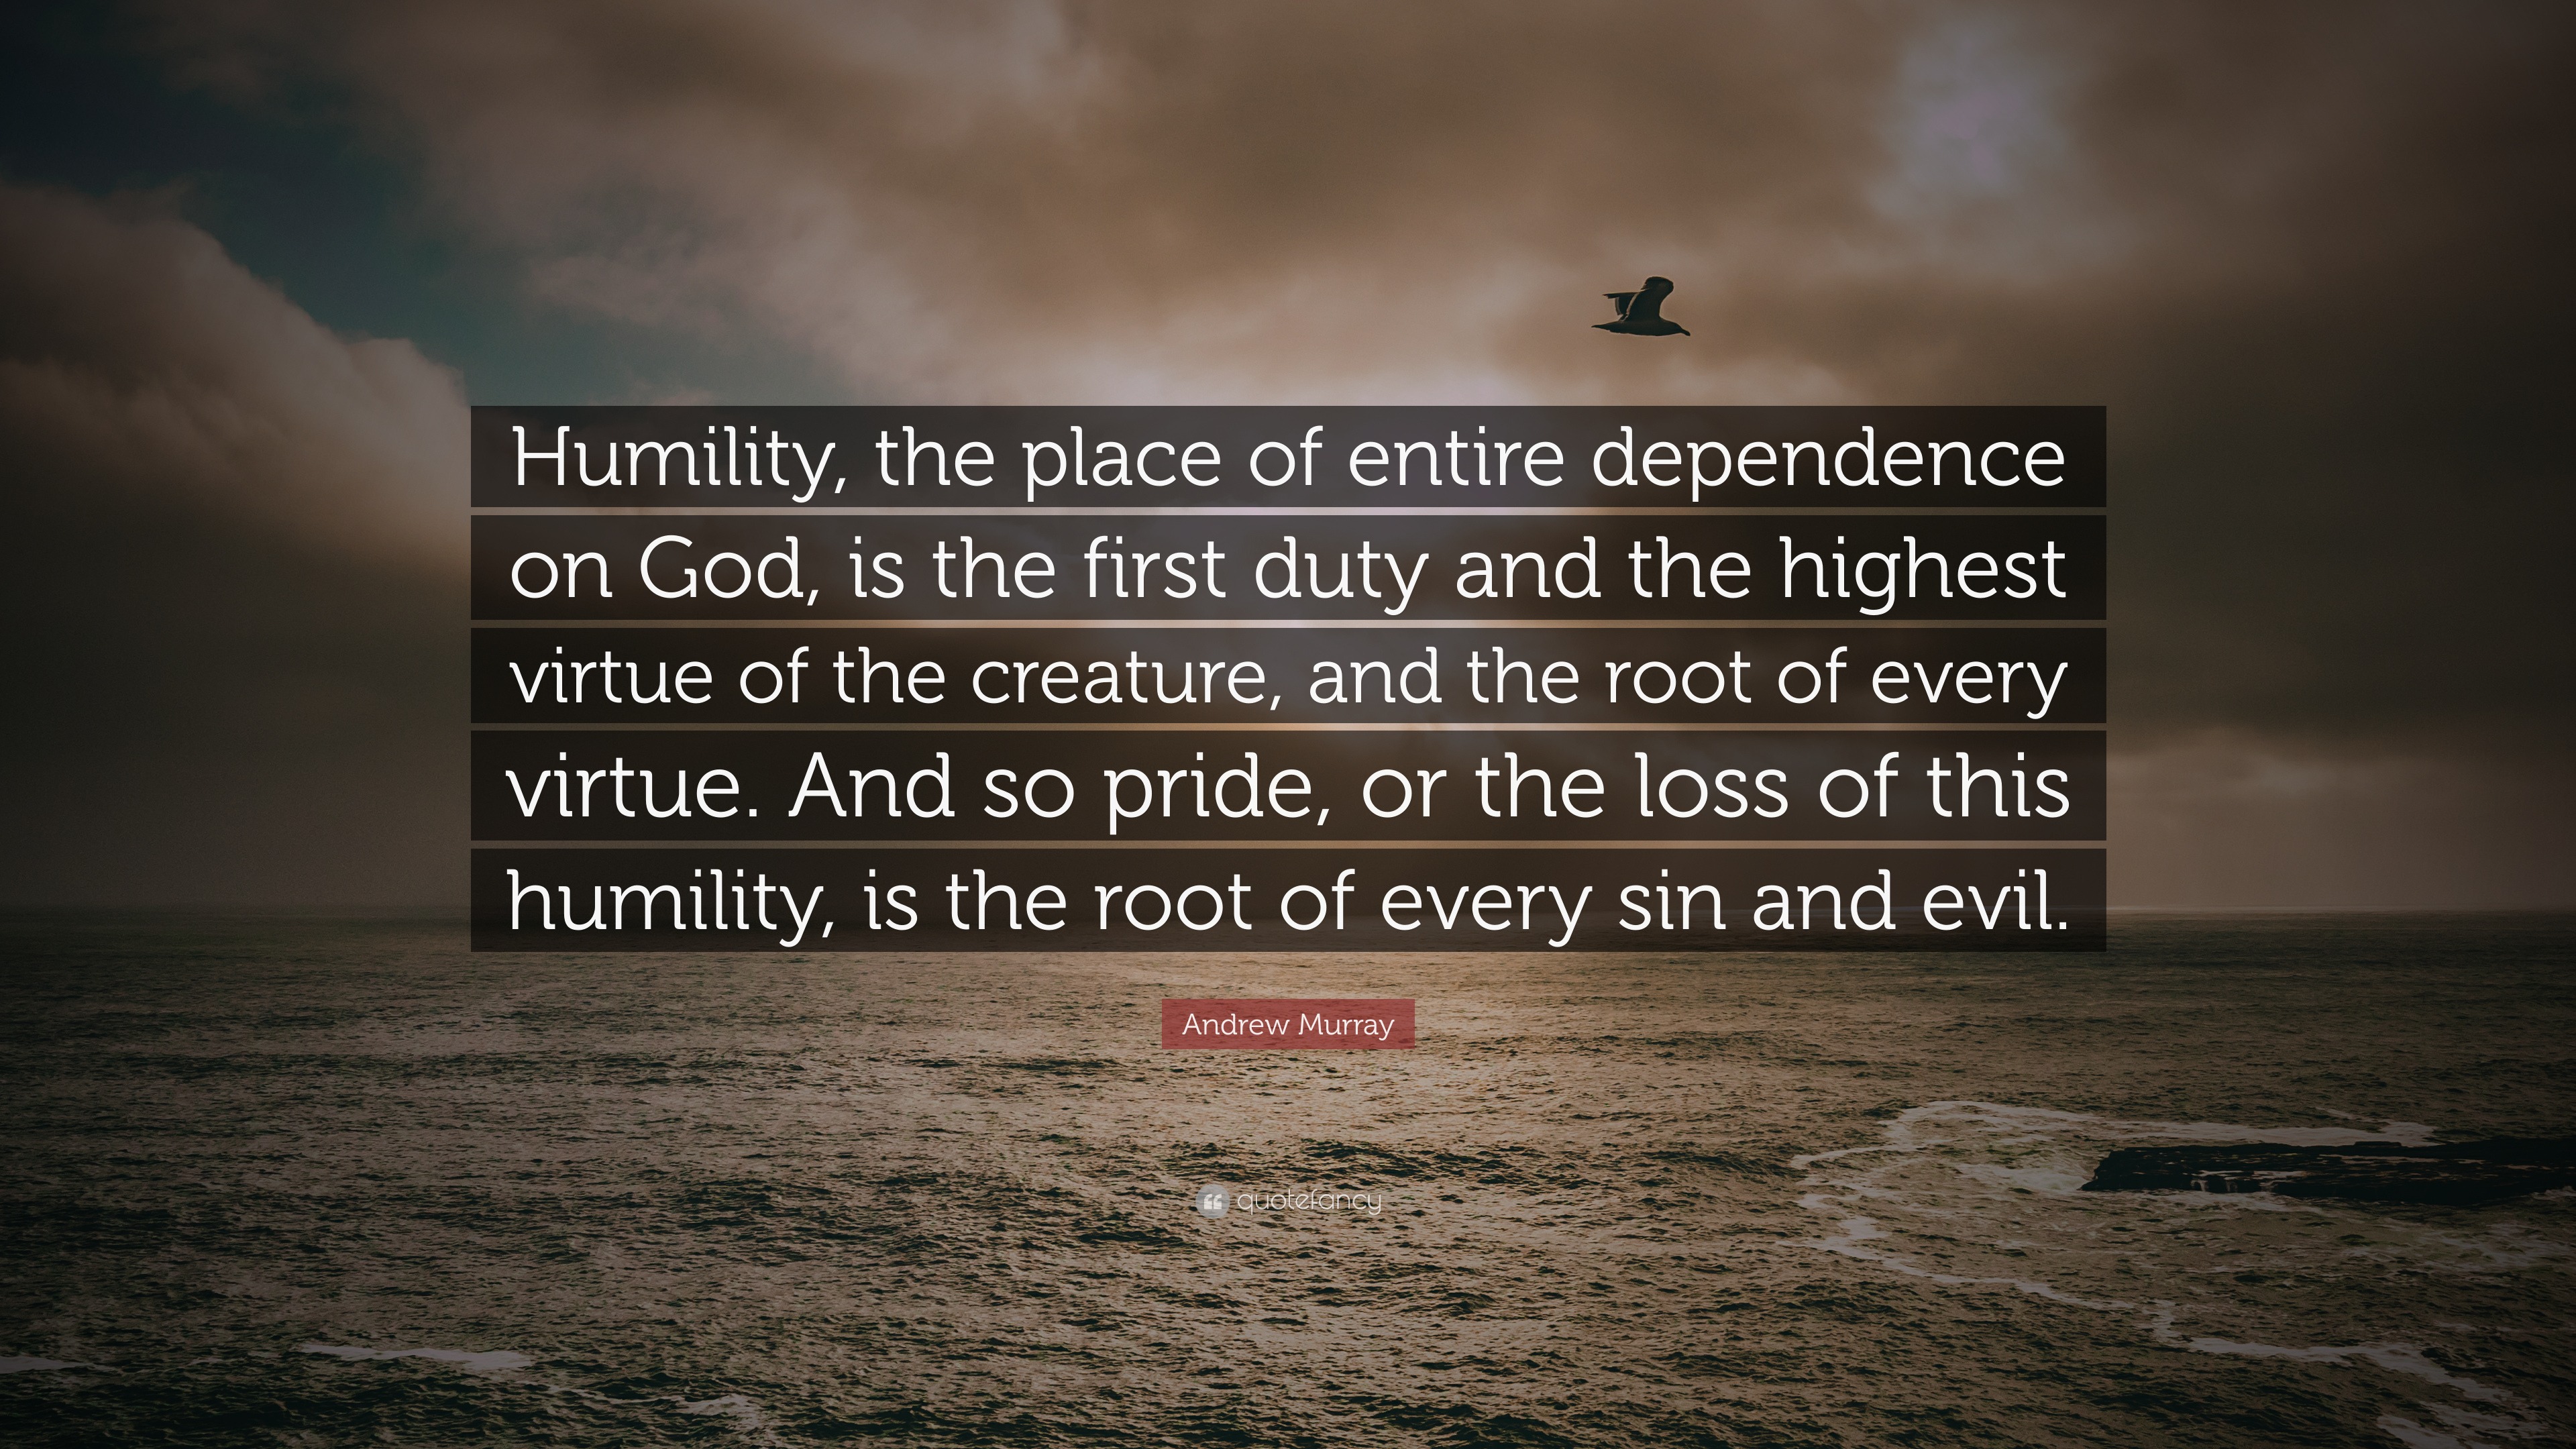 Andrew Murray Quote “Humility, the place of entire dependence on God